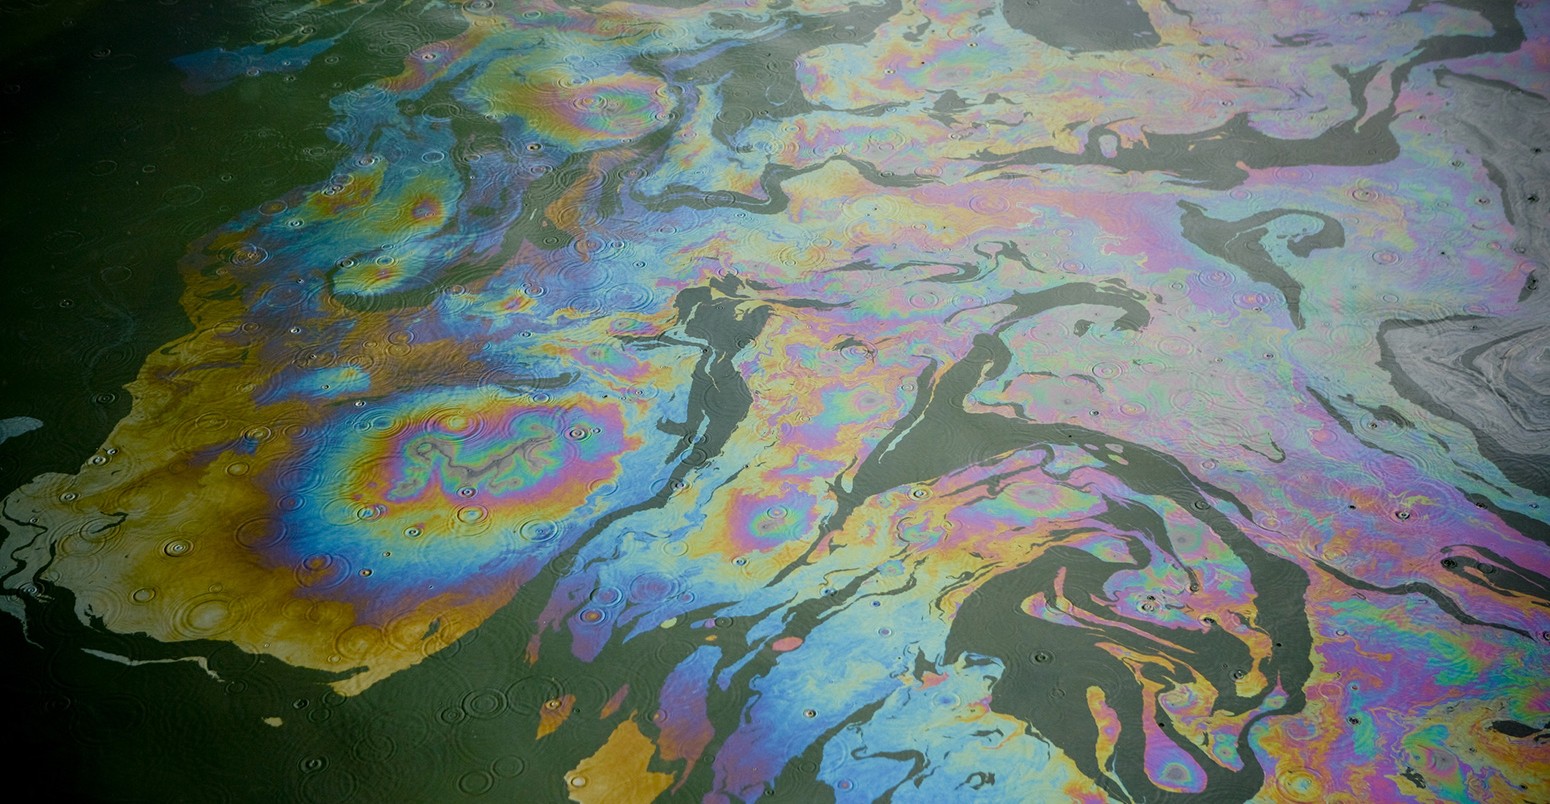 Diesel oil spill on the water surface during a light rain storm.